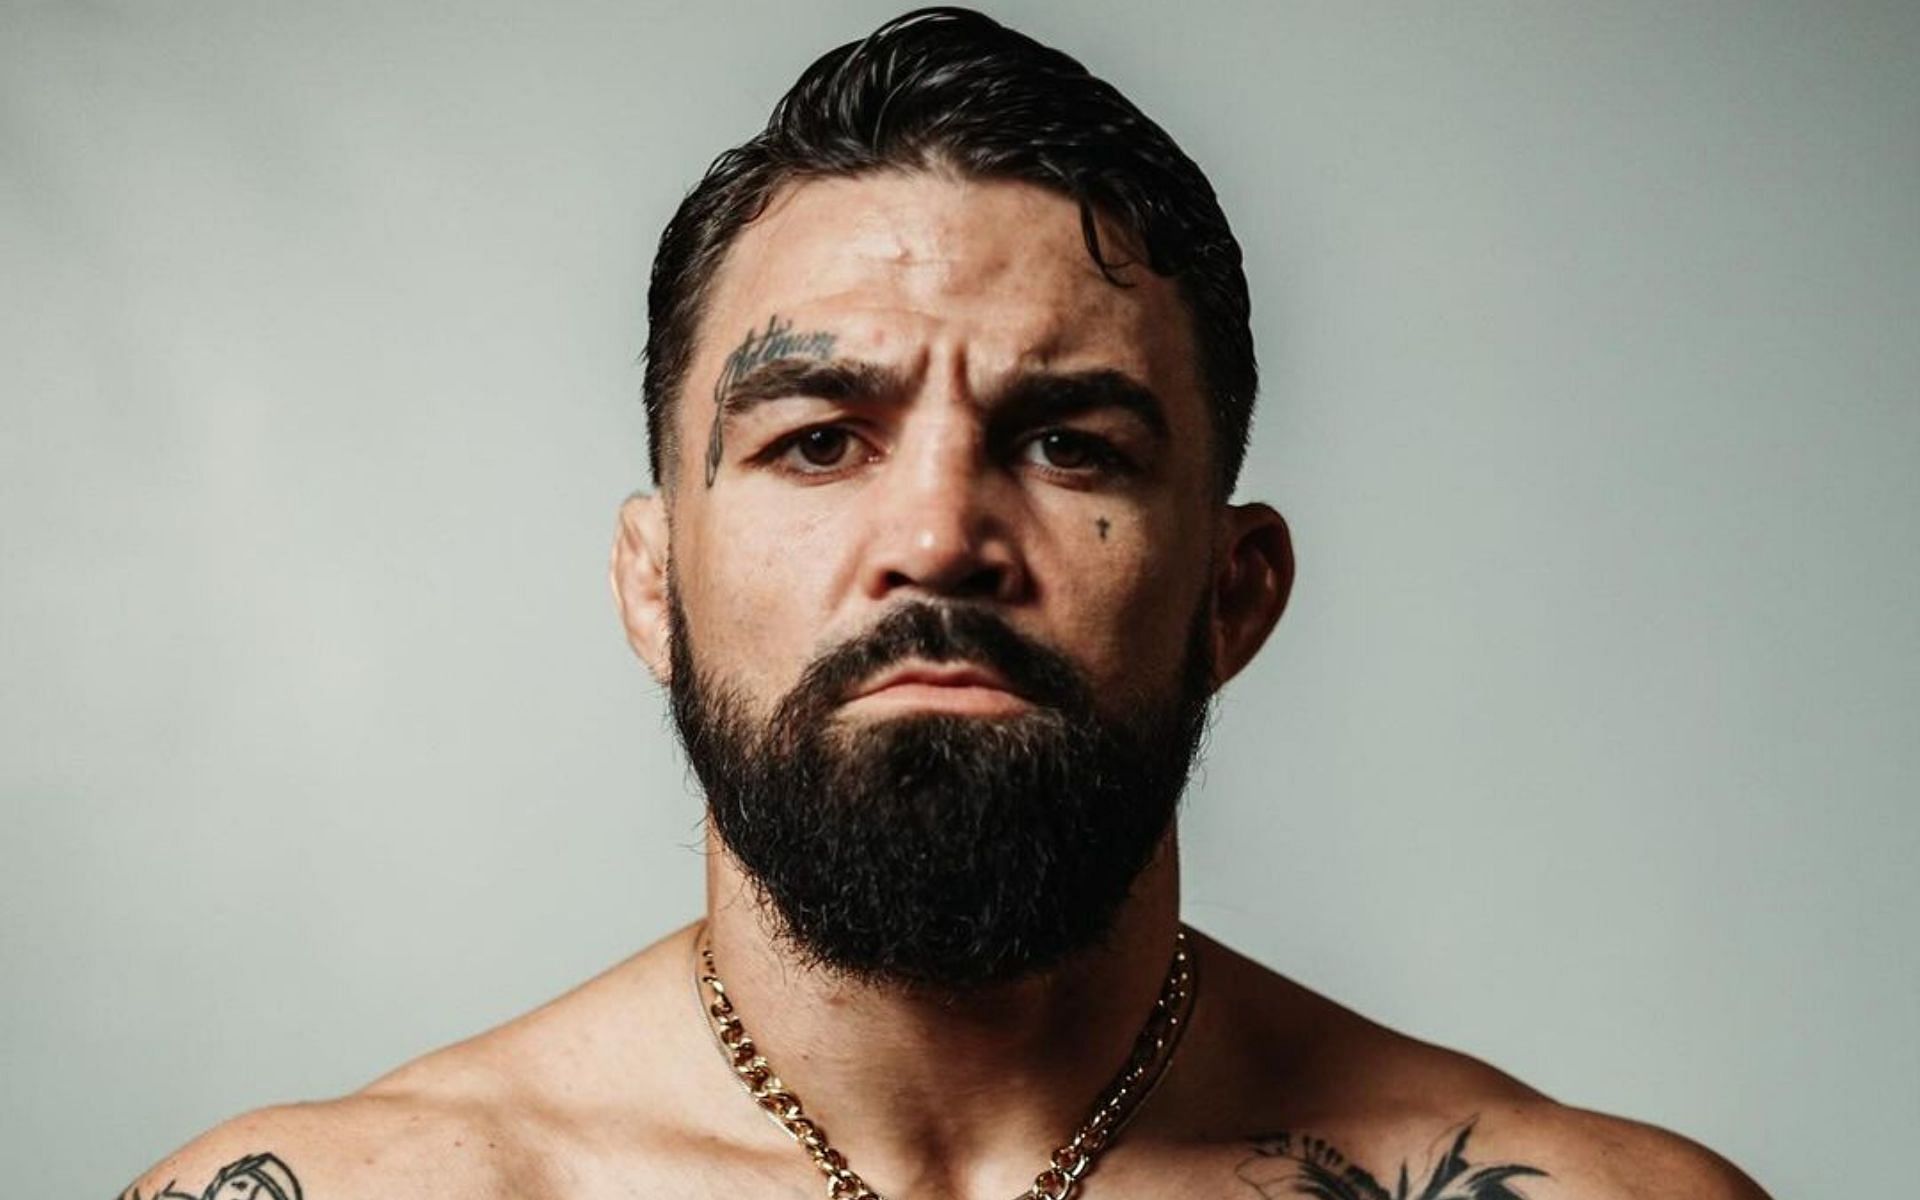  Mike Perry is getting a substantial amount for KnuckleMania IV [Image via: @platinummikeperry on Instagram]